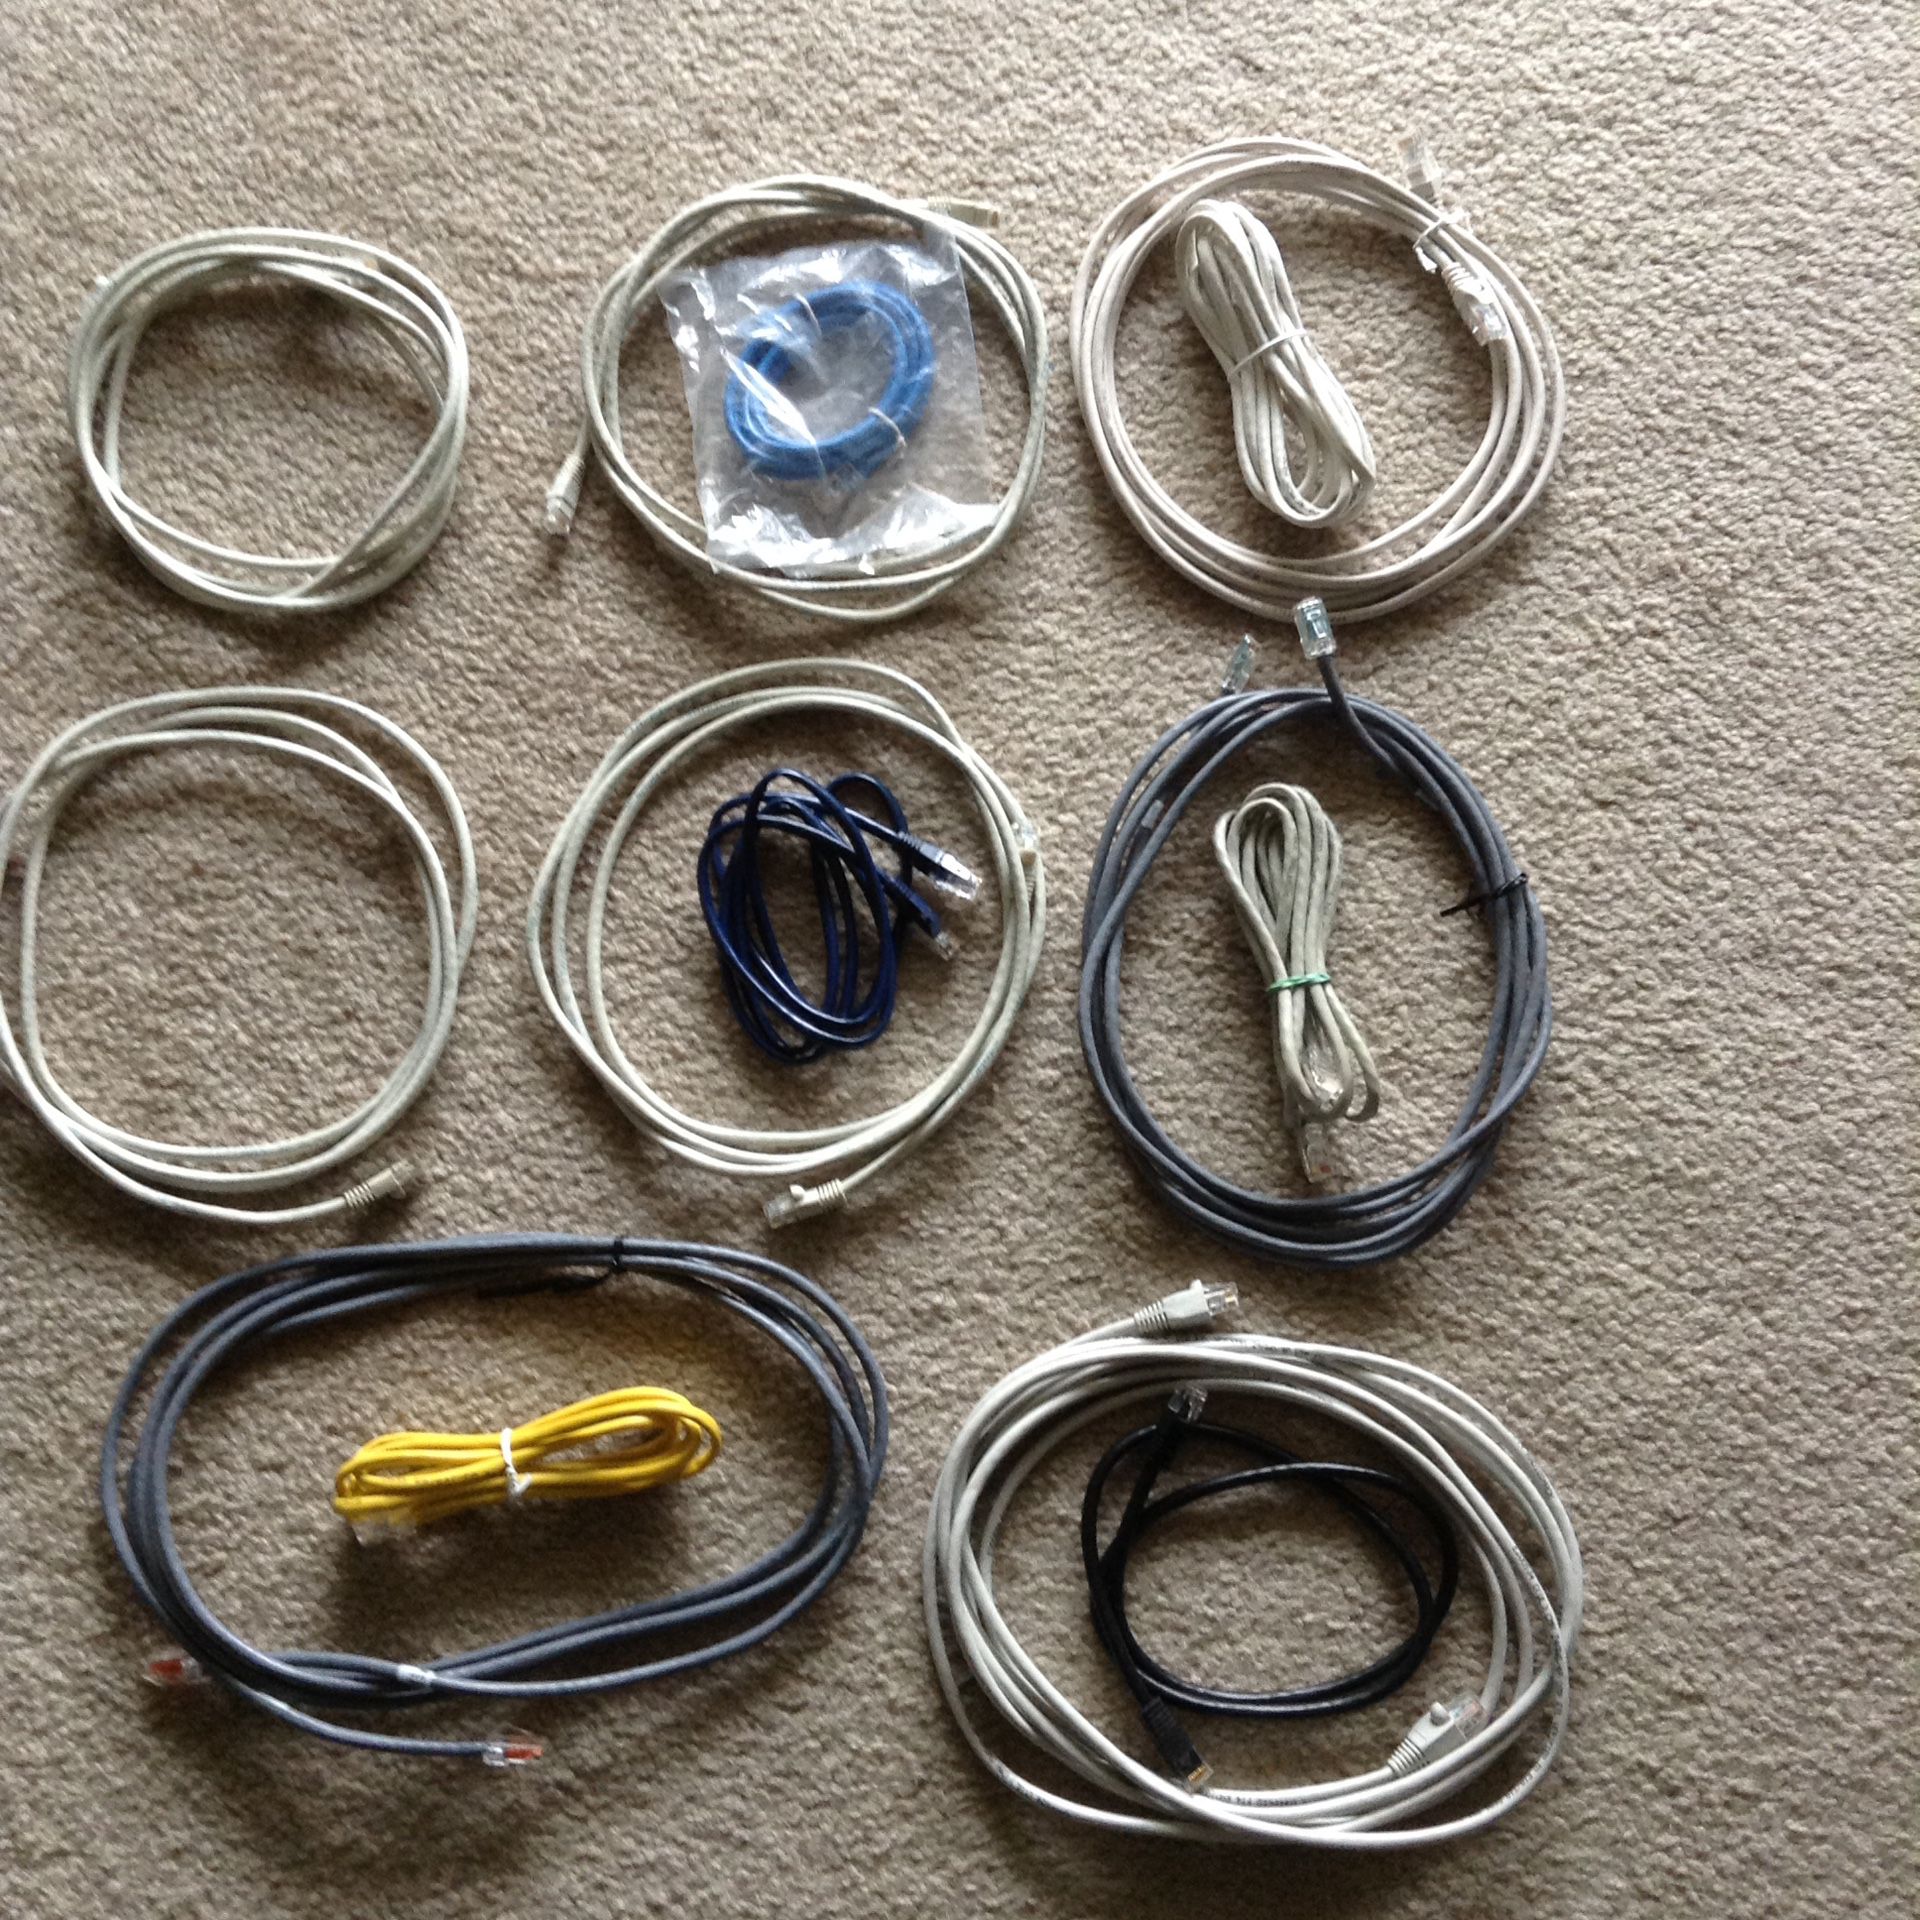 Lot of network / Ethernet cables cords wires - varying lengths - 3 - 52 ft - new / gently used